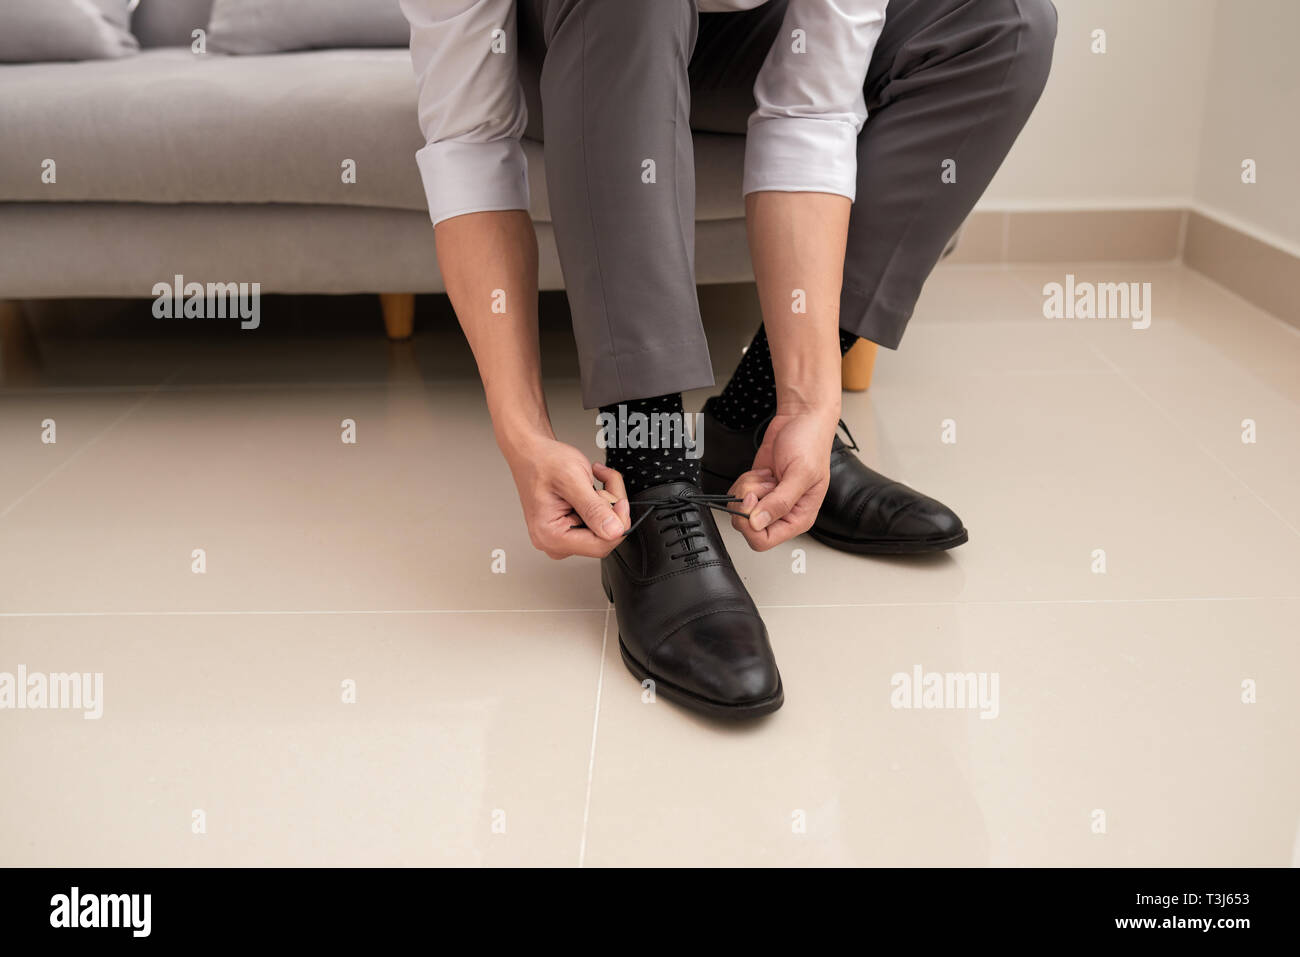 Man's hands tying shoelace of his new shoes. People, business, fashion and footwear concept - close up of man leg and hands tying shoe laces. Stock Photo